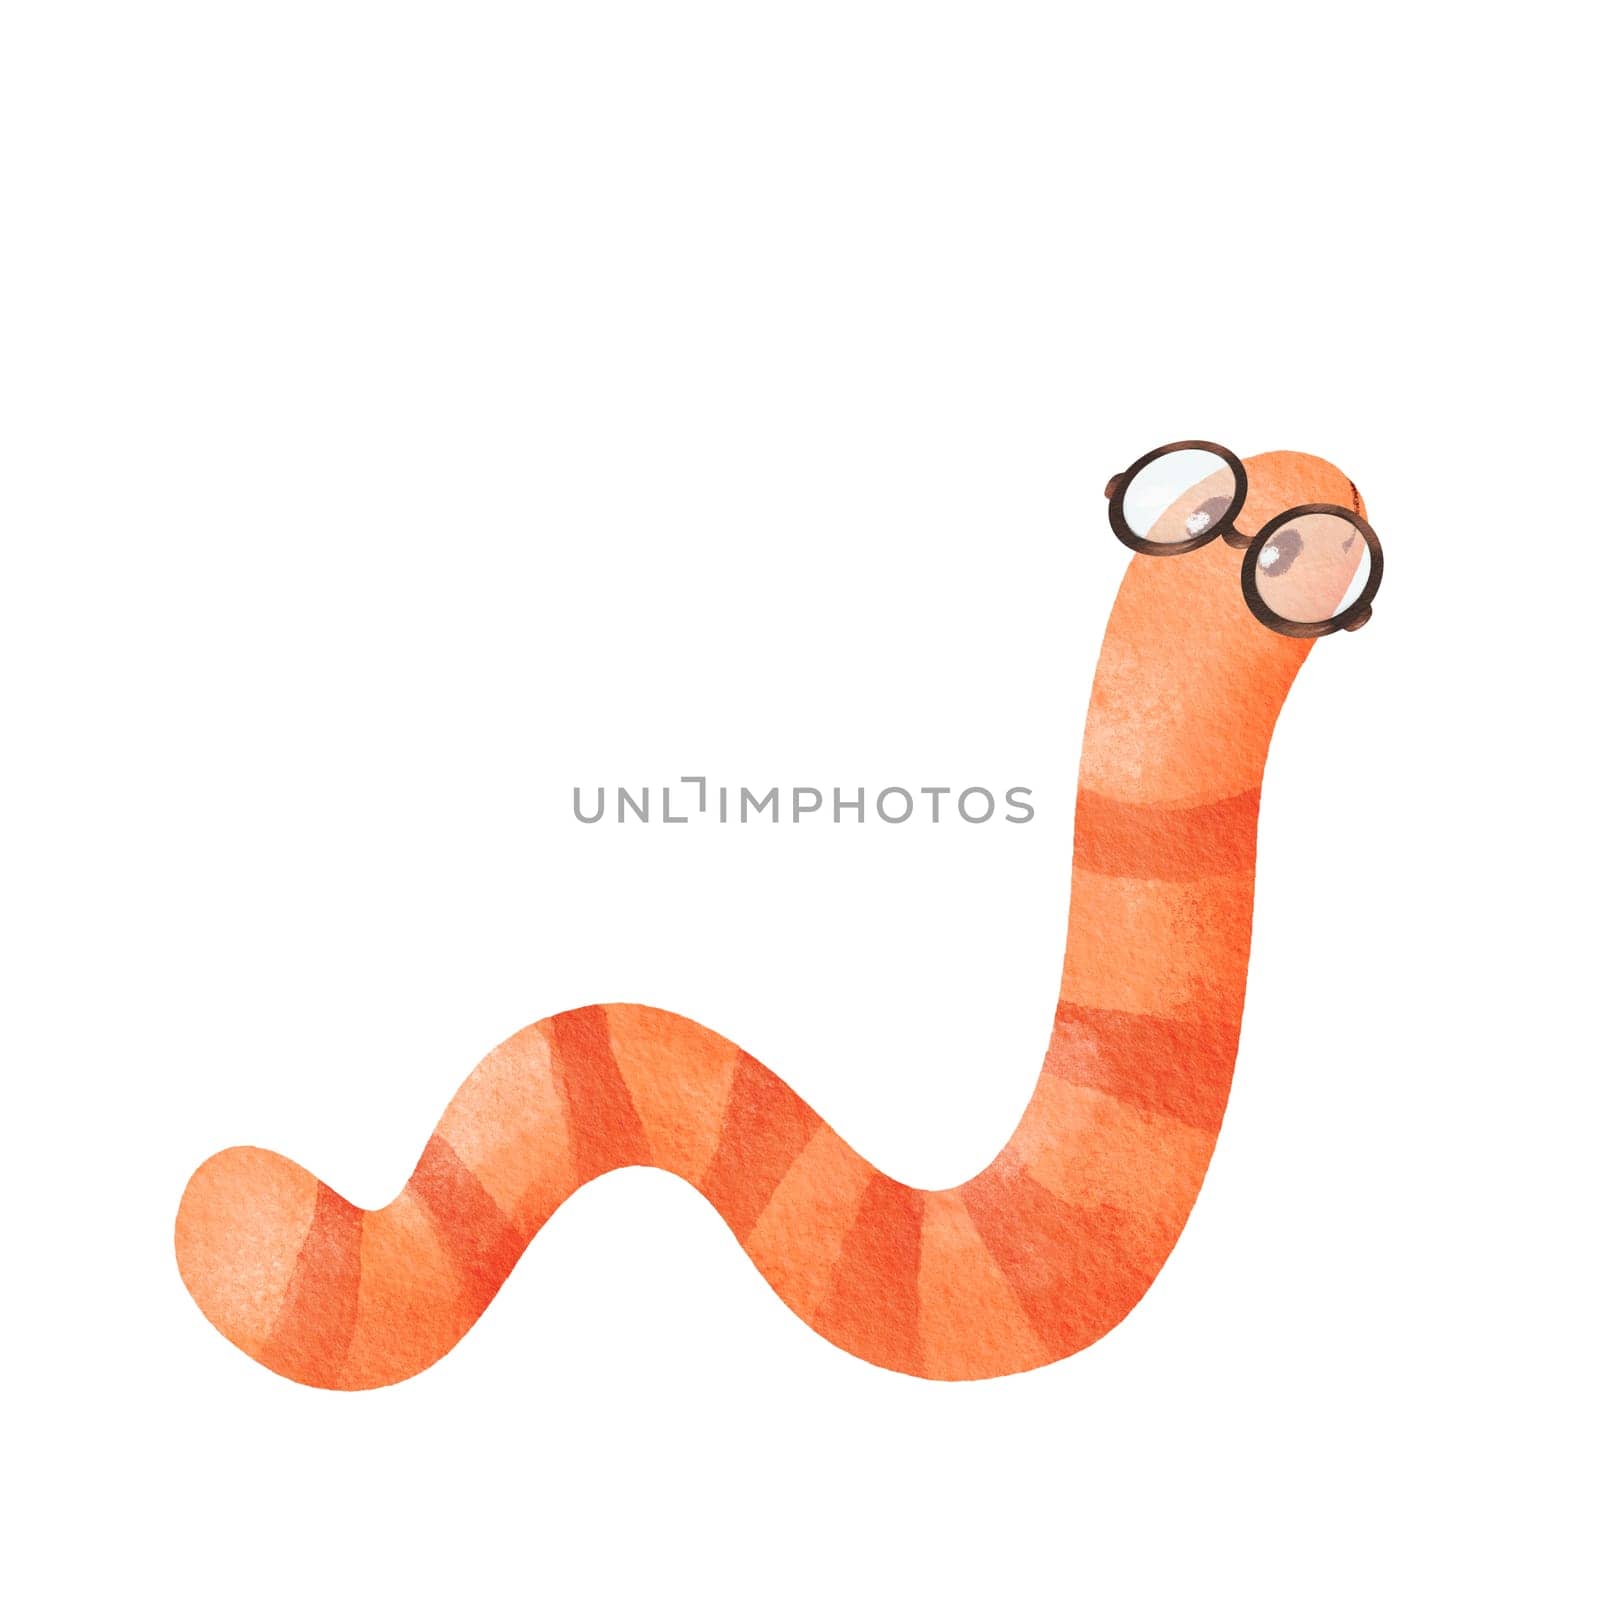 watercolor illustration. a bookworm wearing glasses. child-friendly style. for enhancing educational materials, book-related designs, and creative projects that celebrate the joy of reading by Art_Mari_Ka